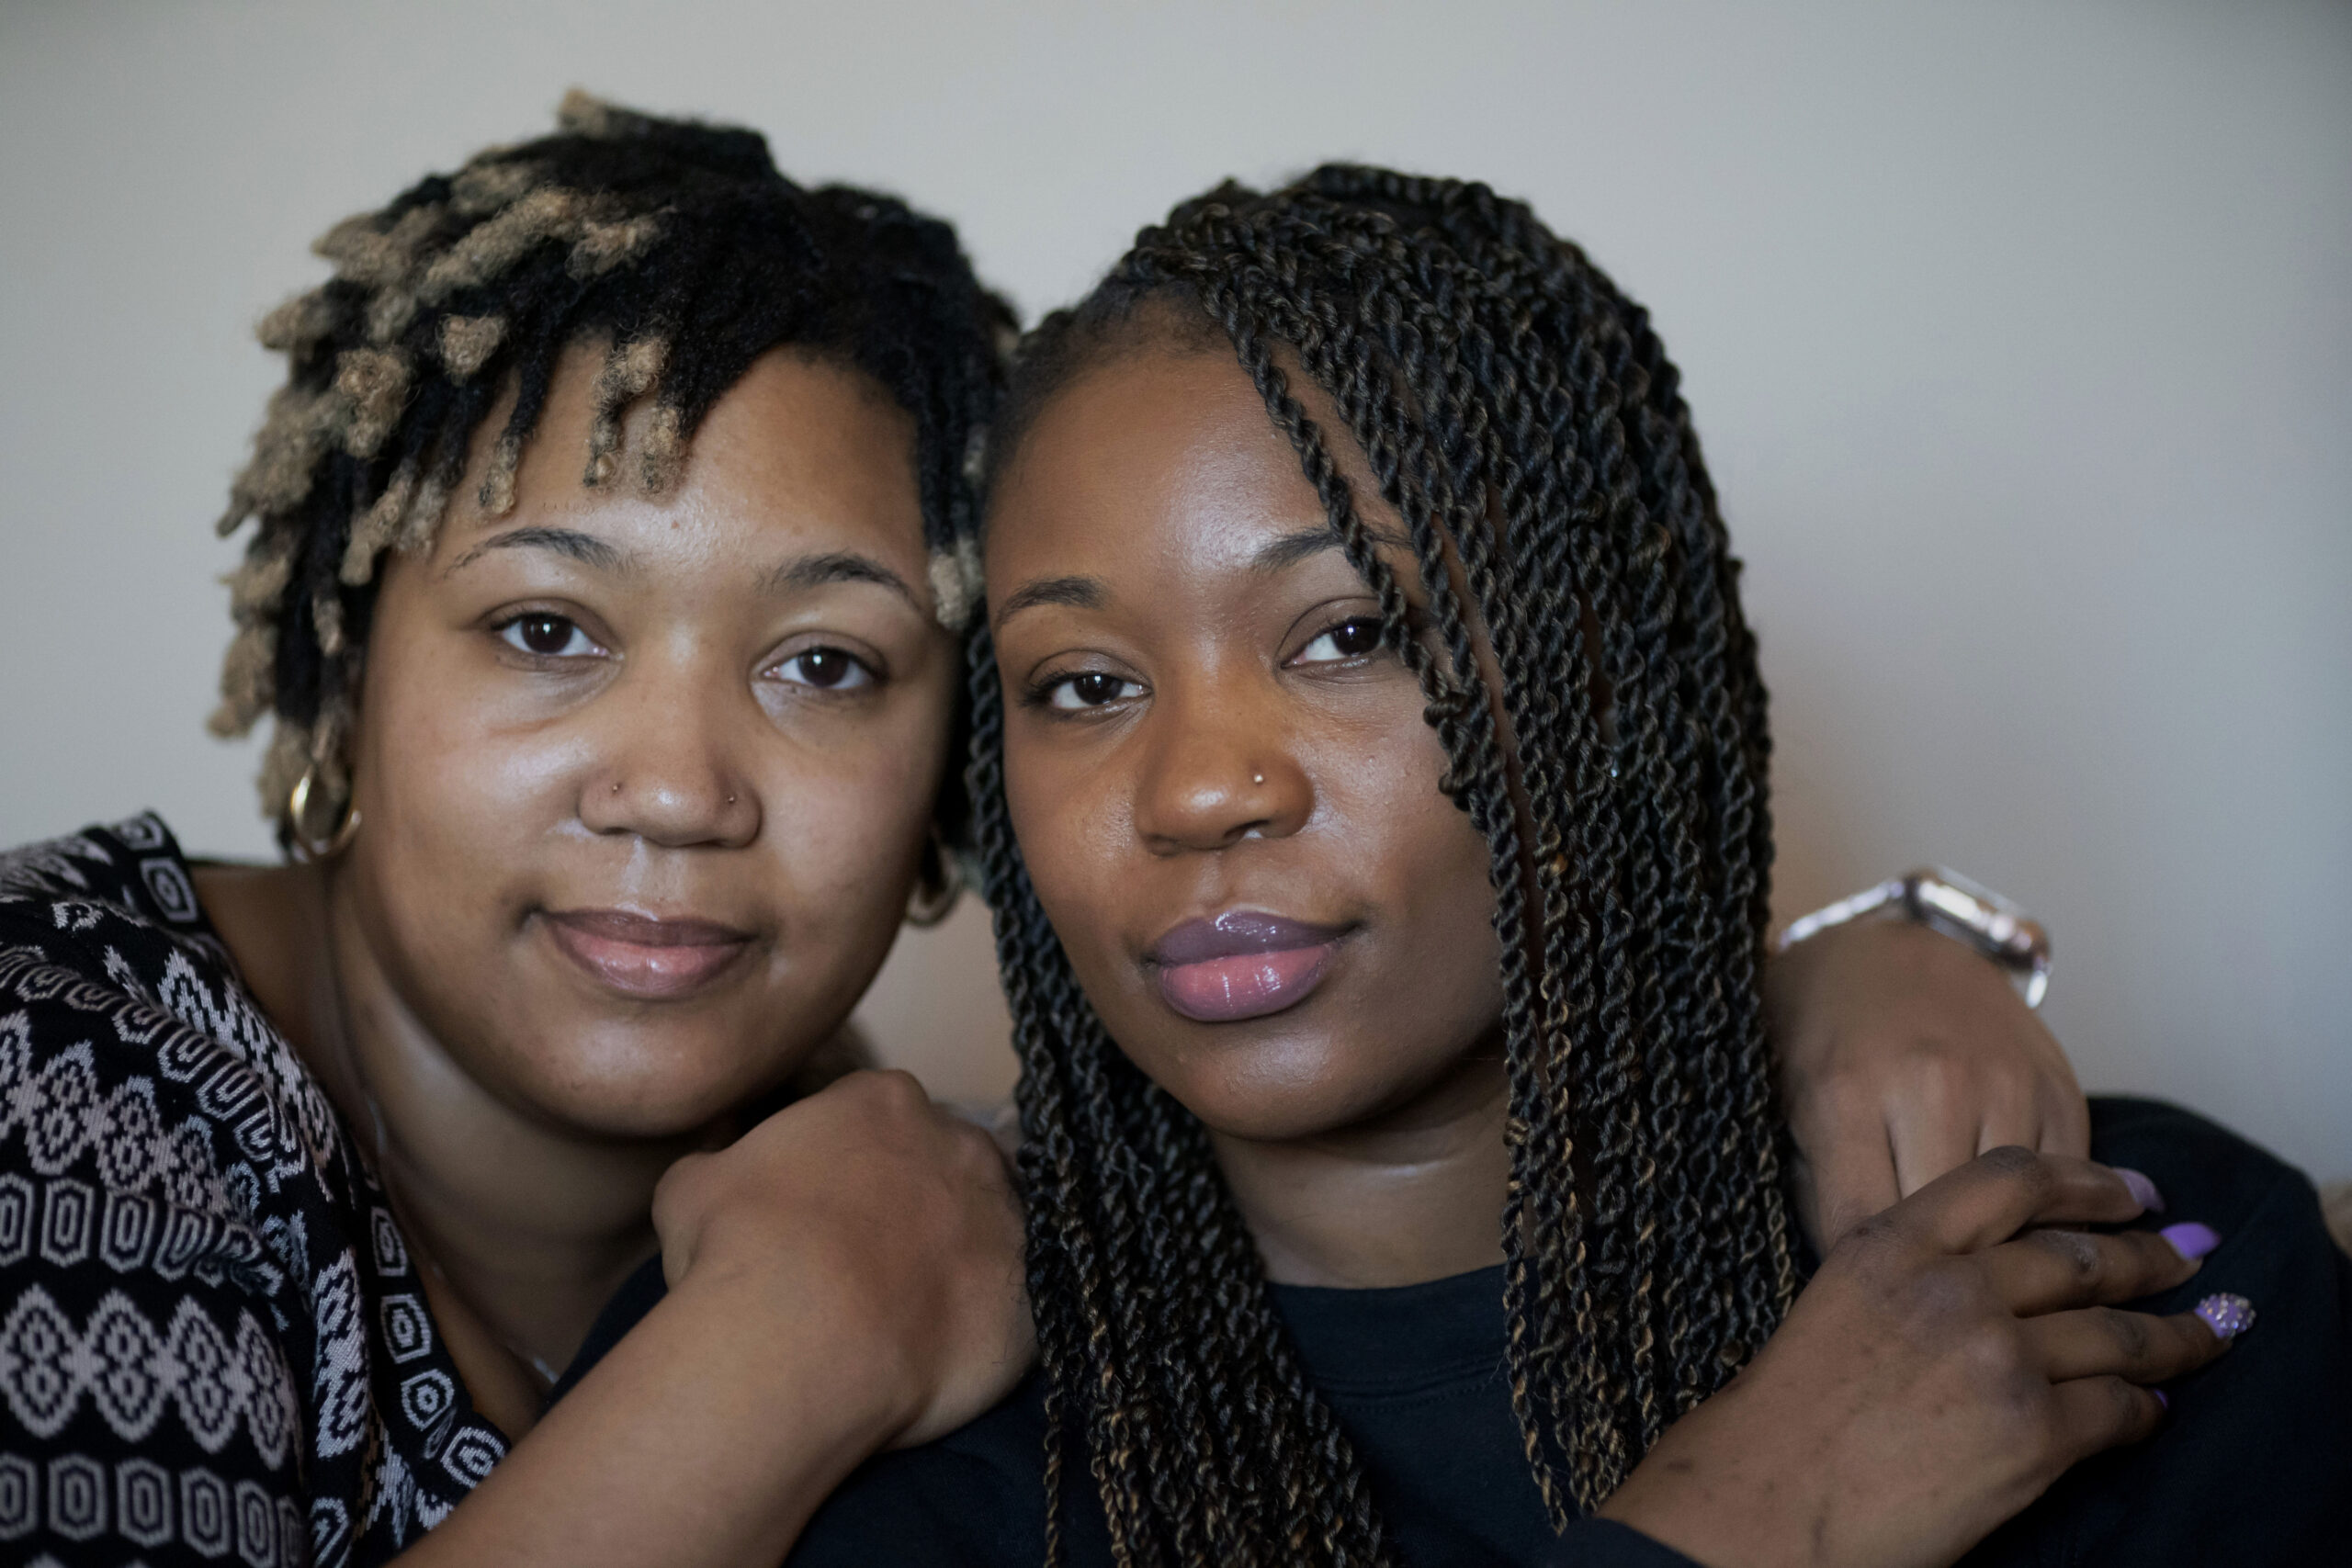 Sisters Angelica Lyons, left, and Ansonia Lyons pose for a portrait at their parents' home in Birmi...